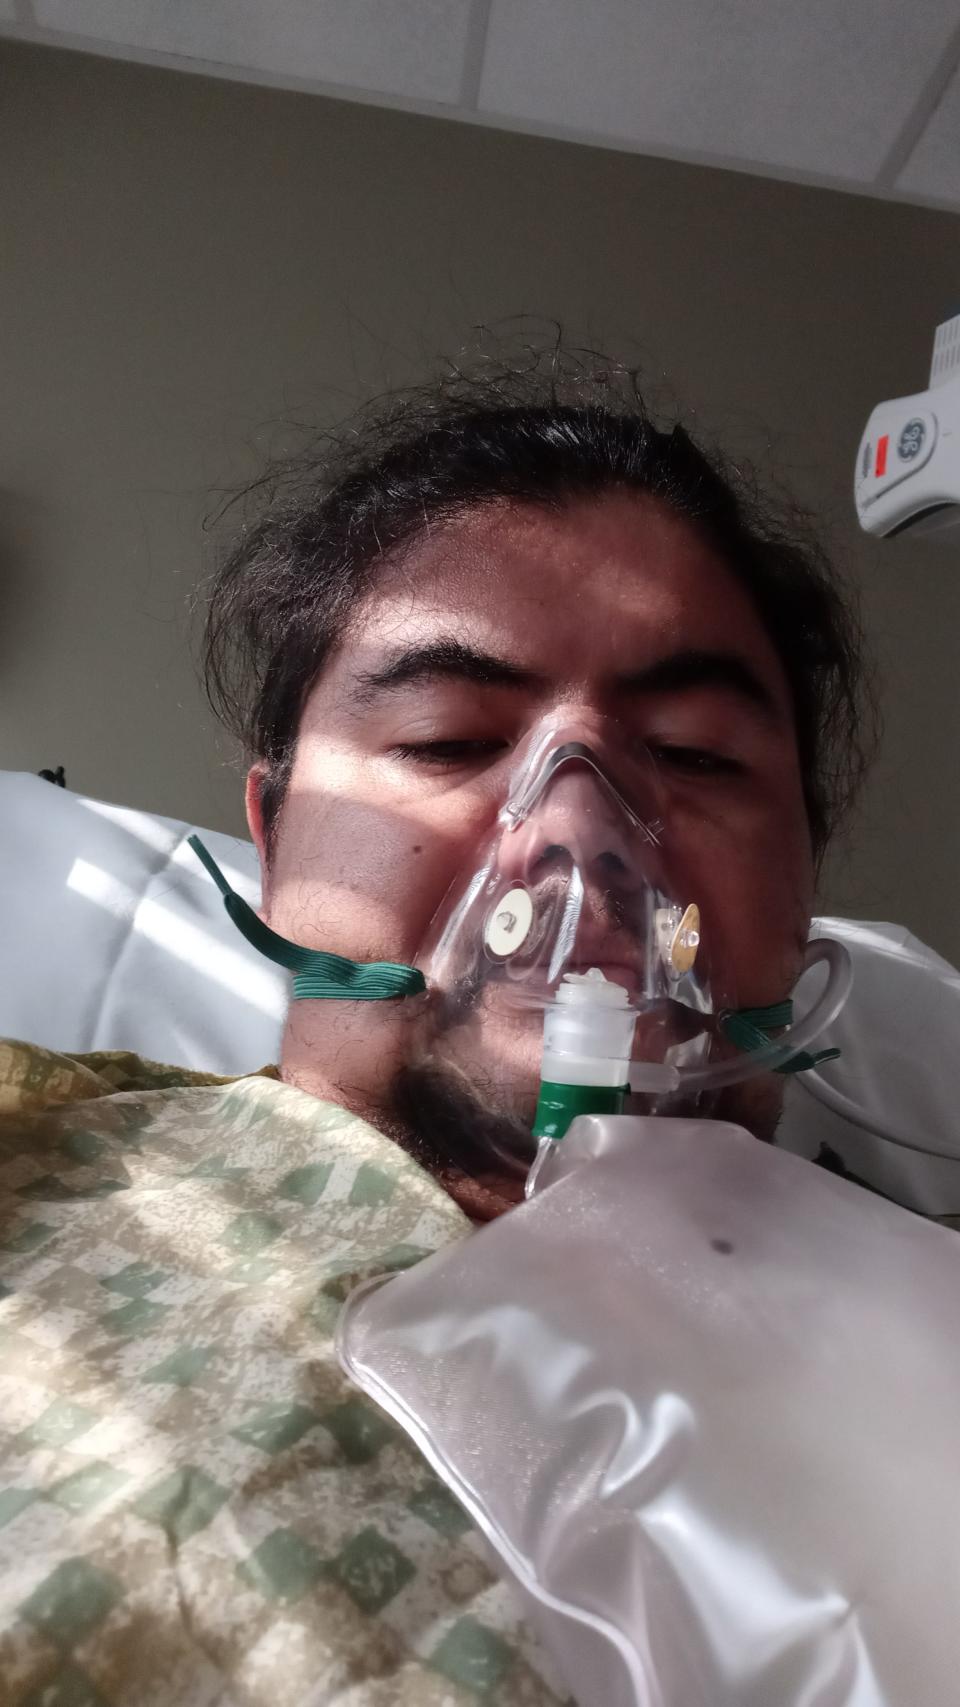 When Manuel Chimal finally was admitted in the hospital, he needed oxygen, but eventually his lungs couldn't keep up with what he needed, and he had to be put on a ventilator.